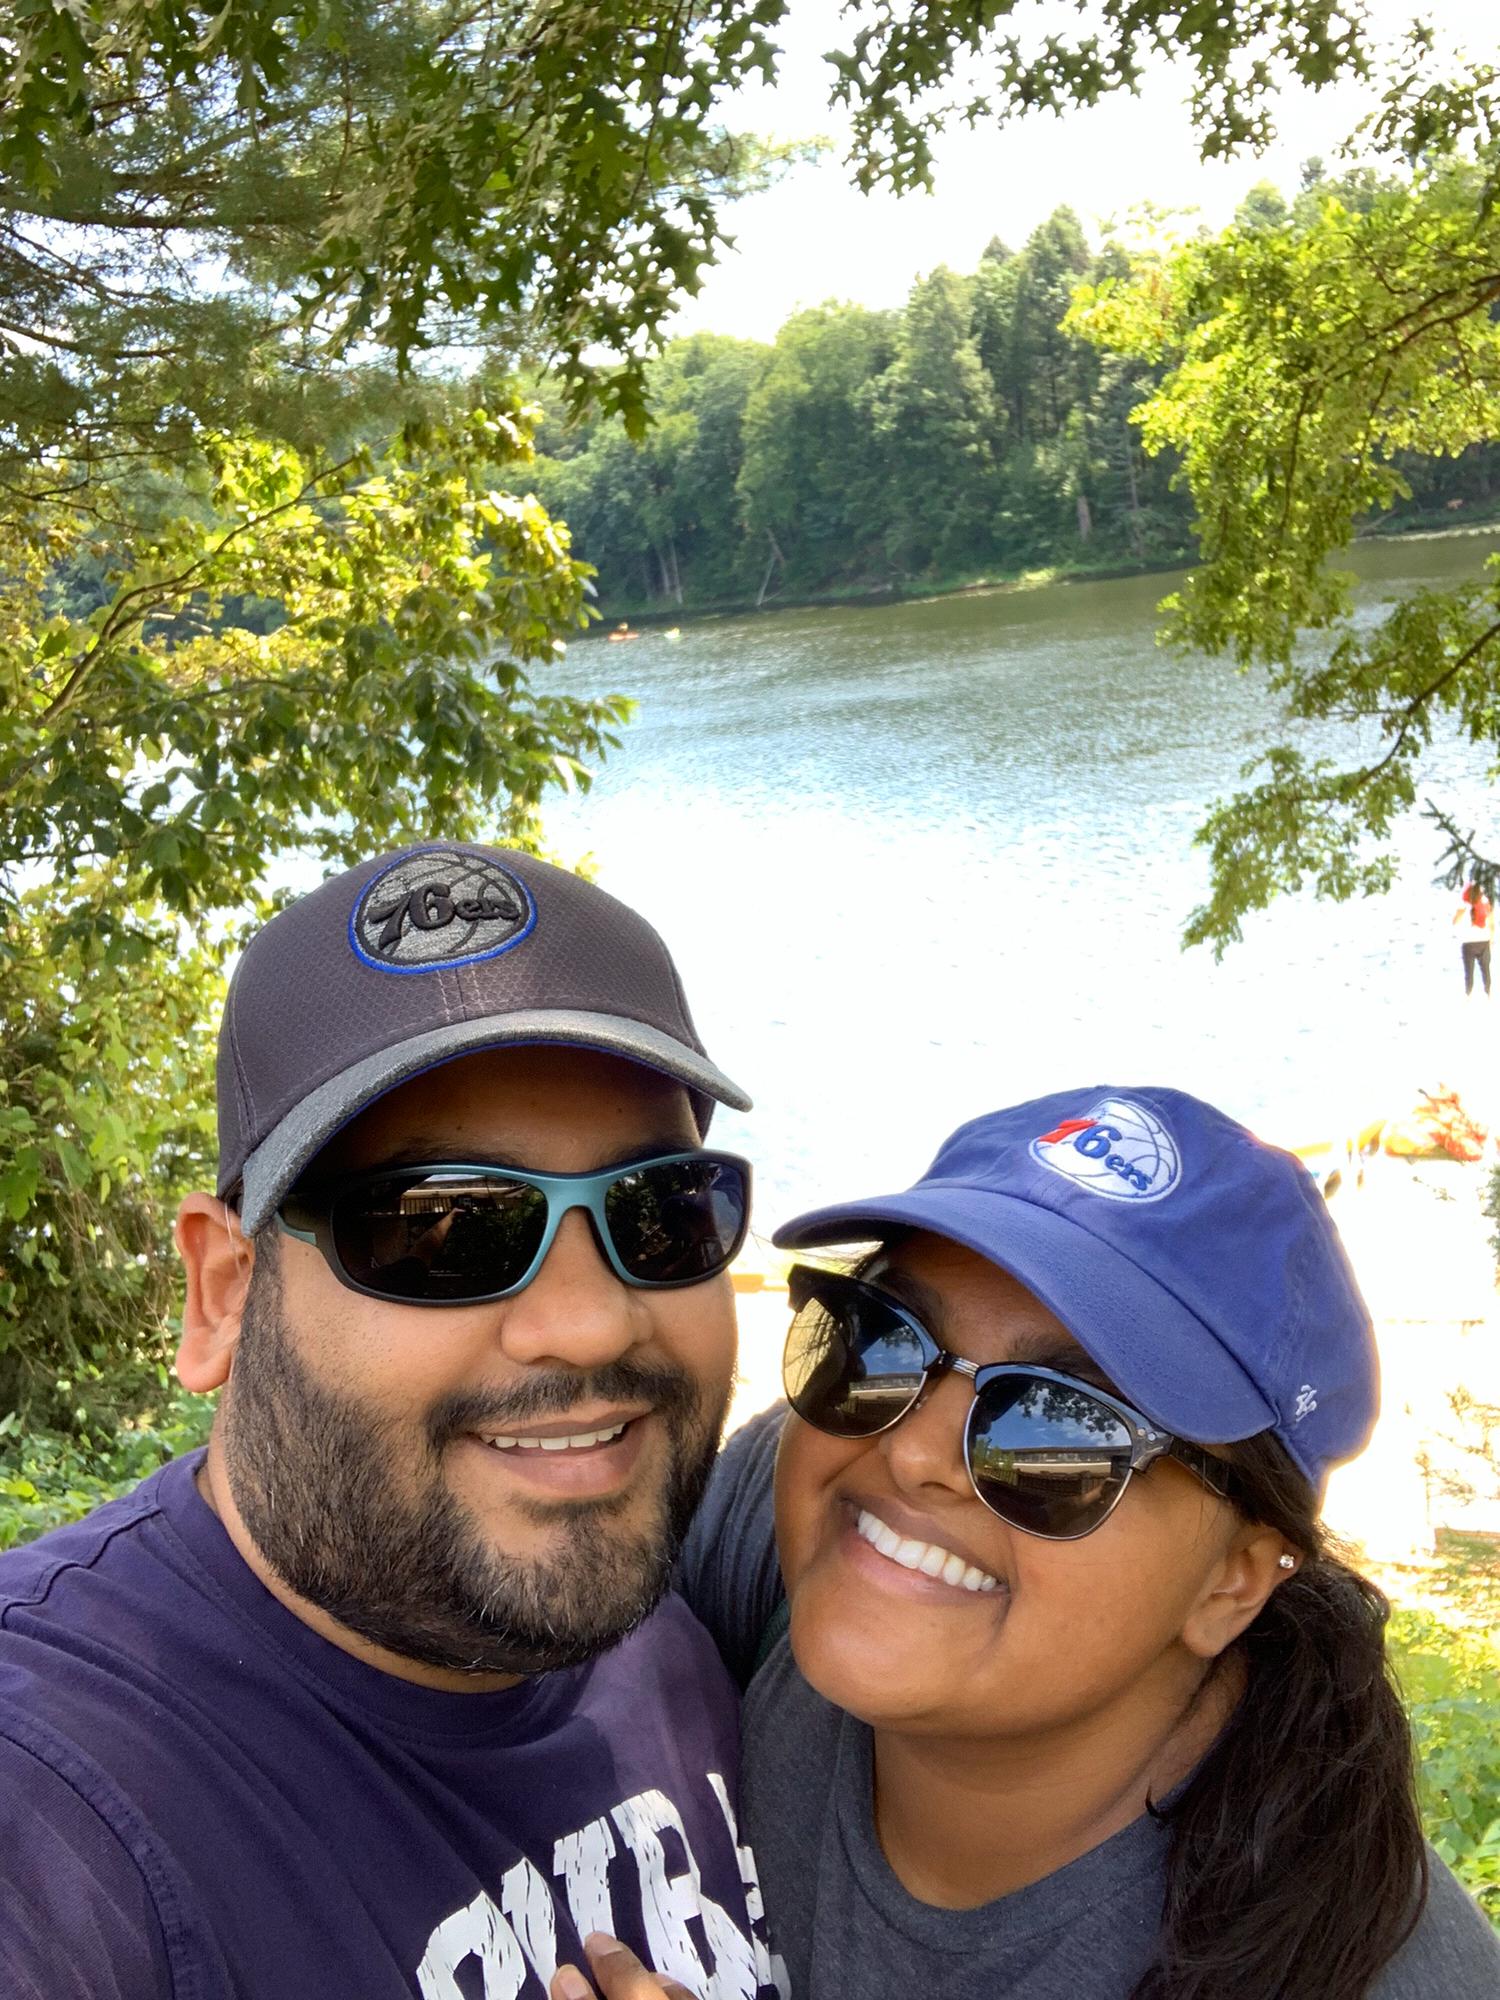 Hiking in the Poconos- Lake Harmony, August 2019